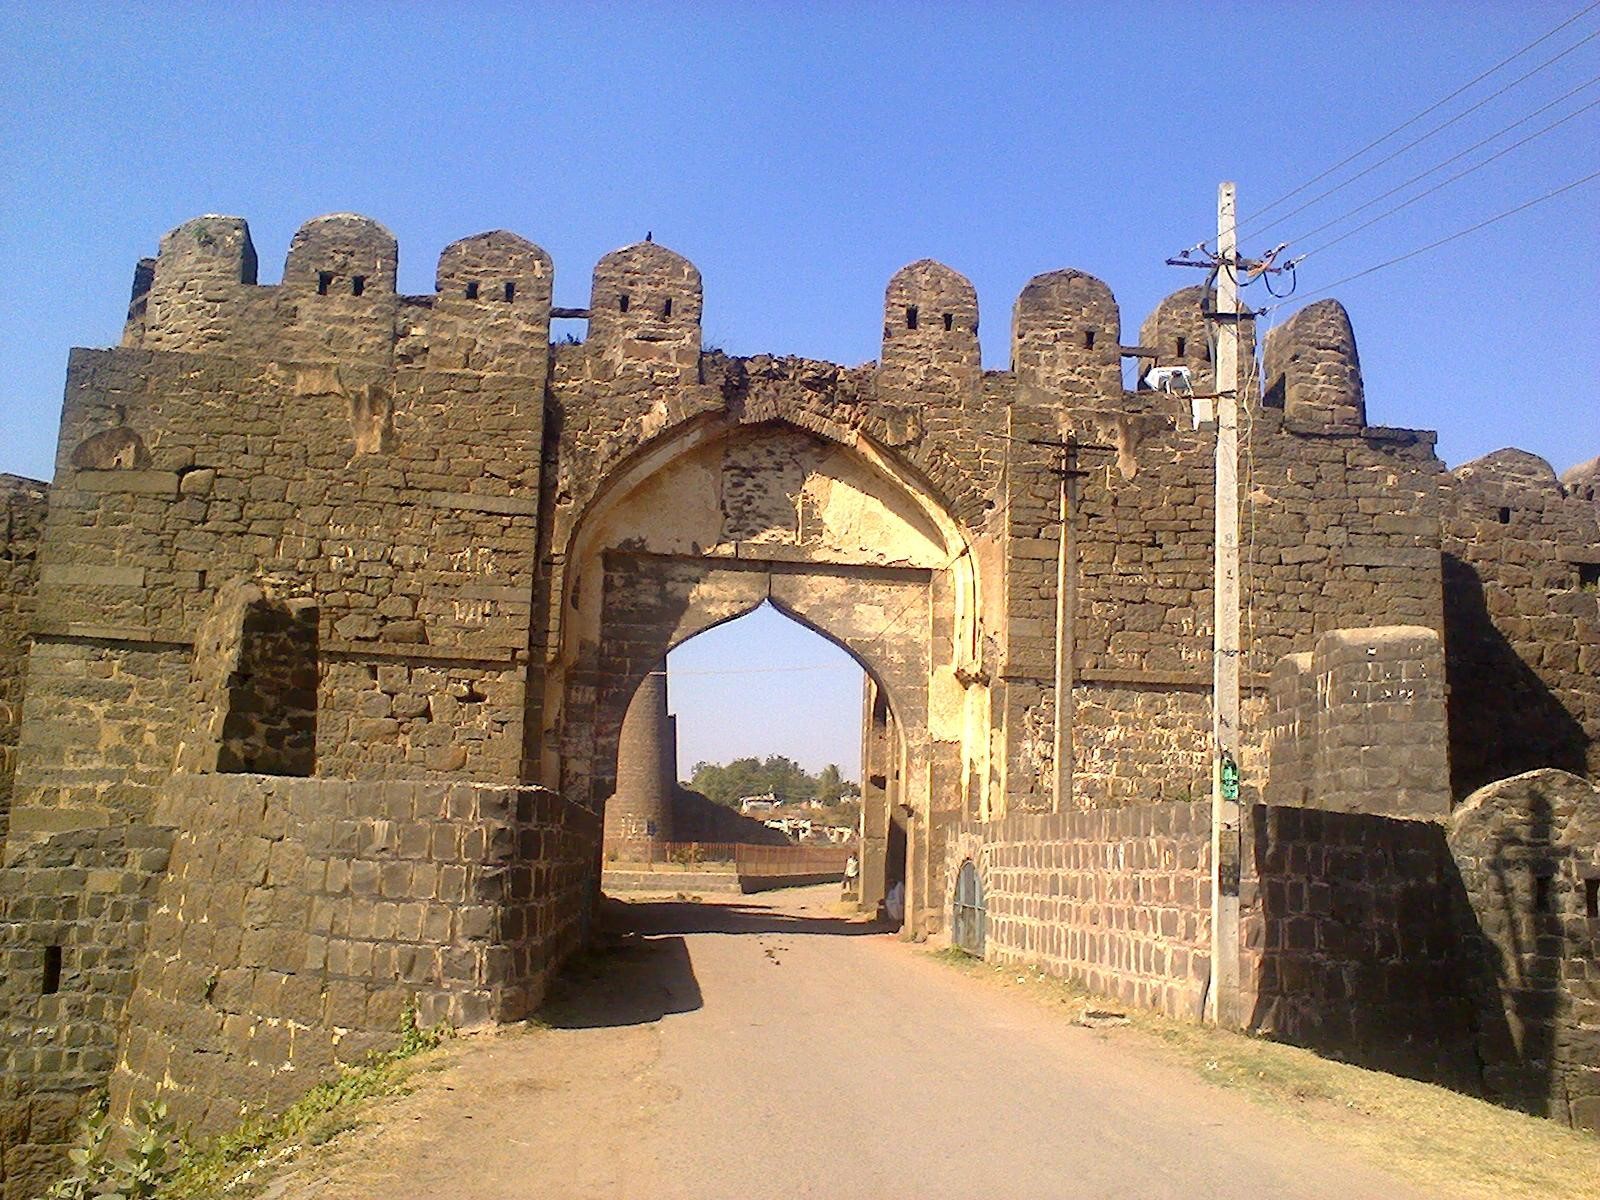  Entrance to the Gulbarga fort